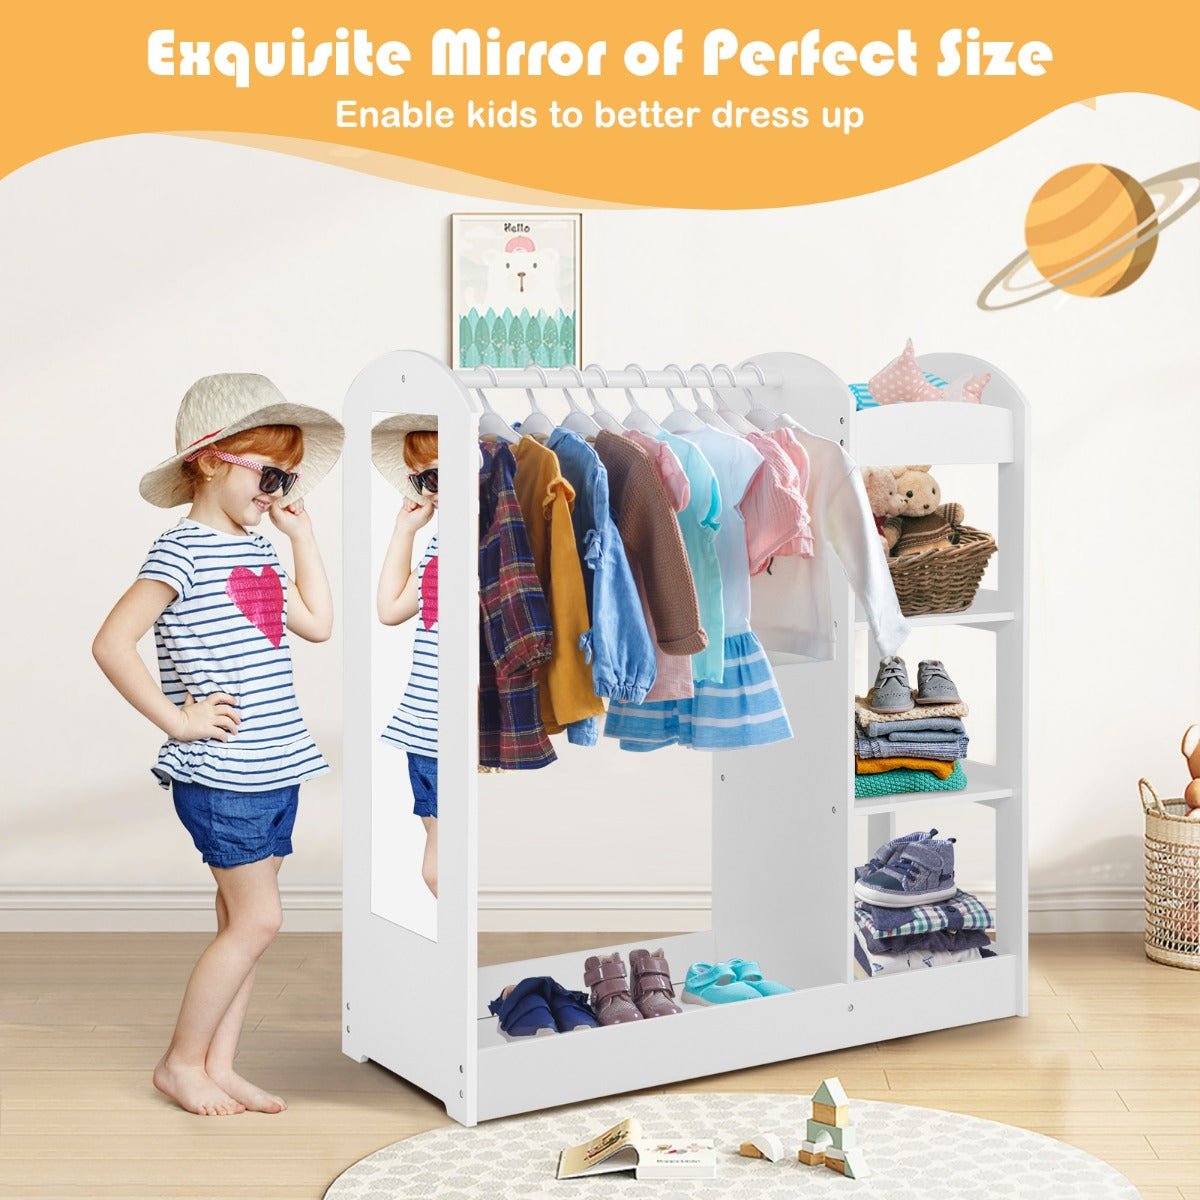 Explore Imagination: White Kids Dress Up Cupboard with Shelves and Mirror